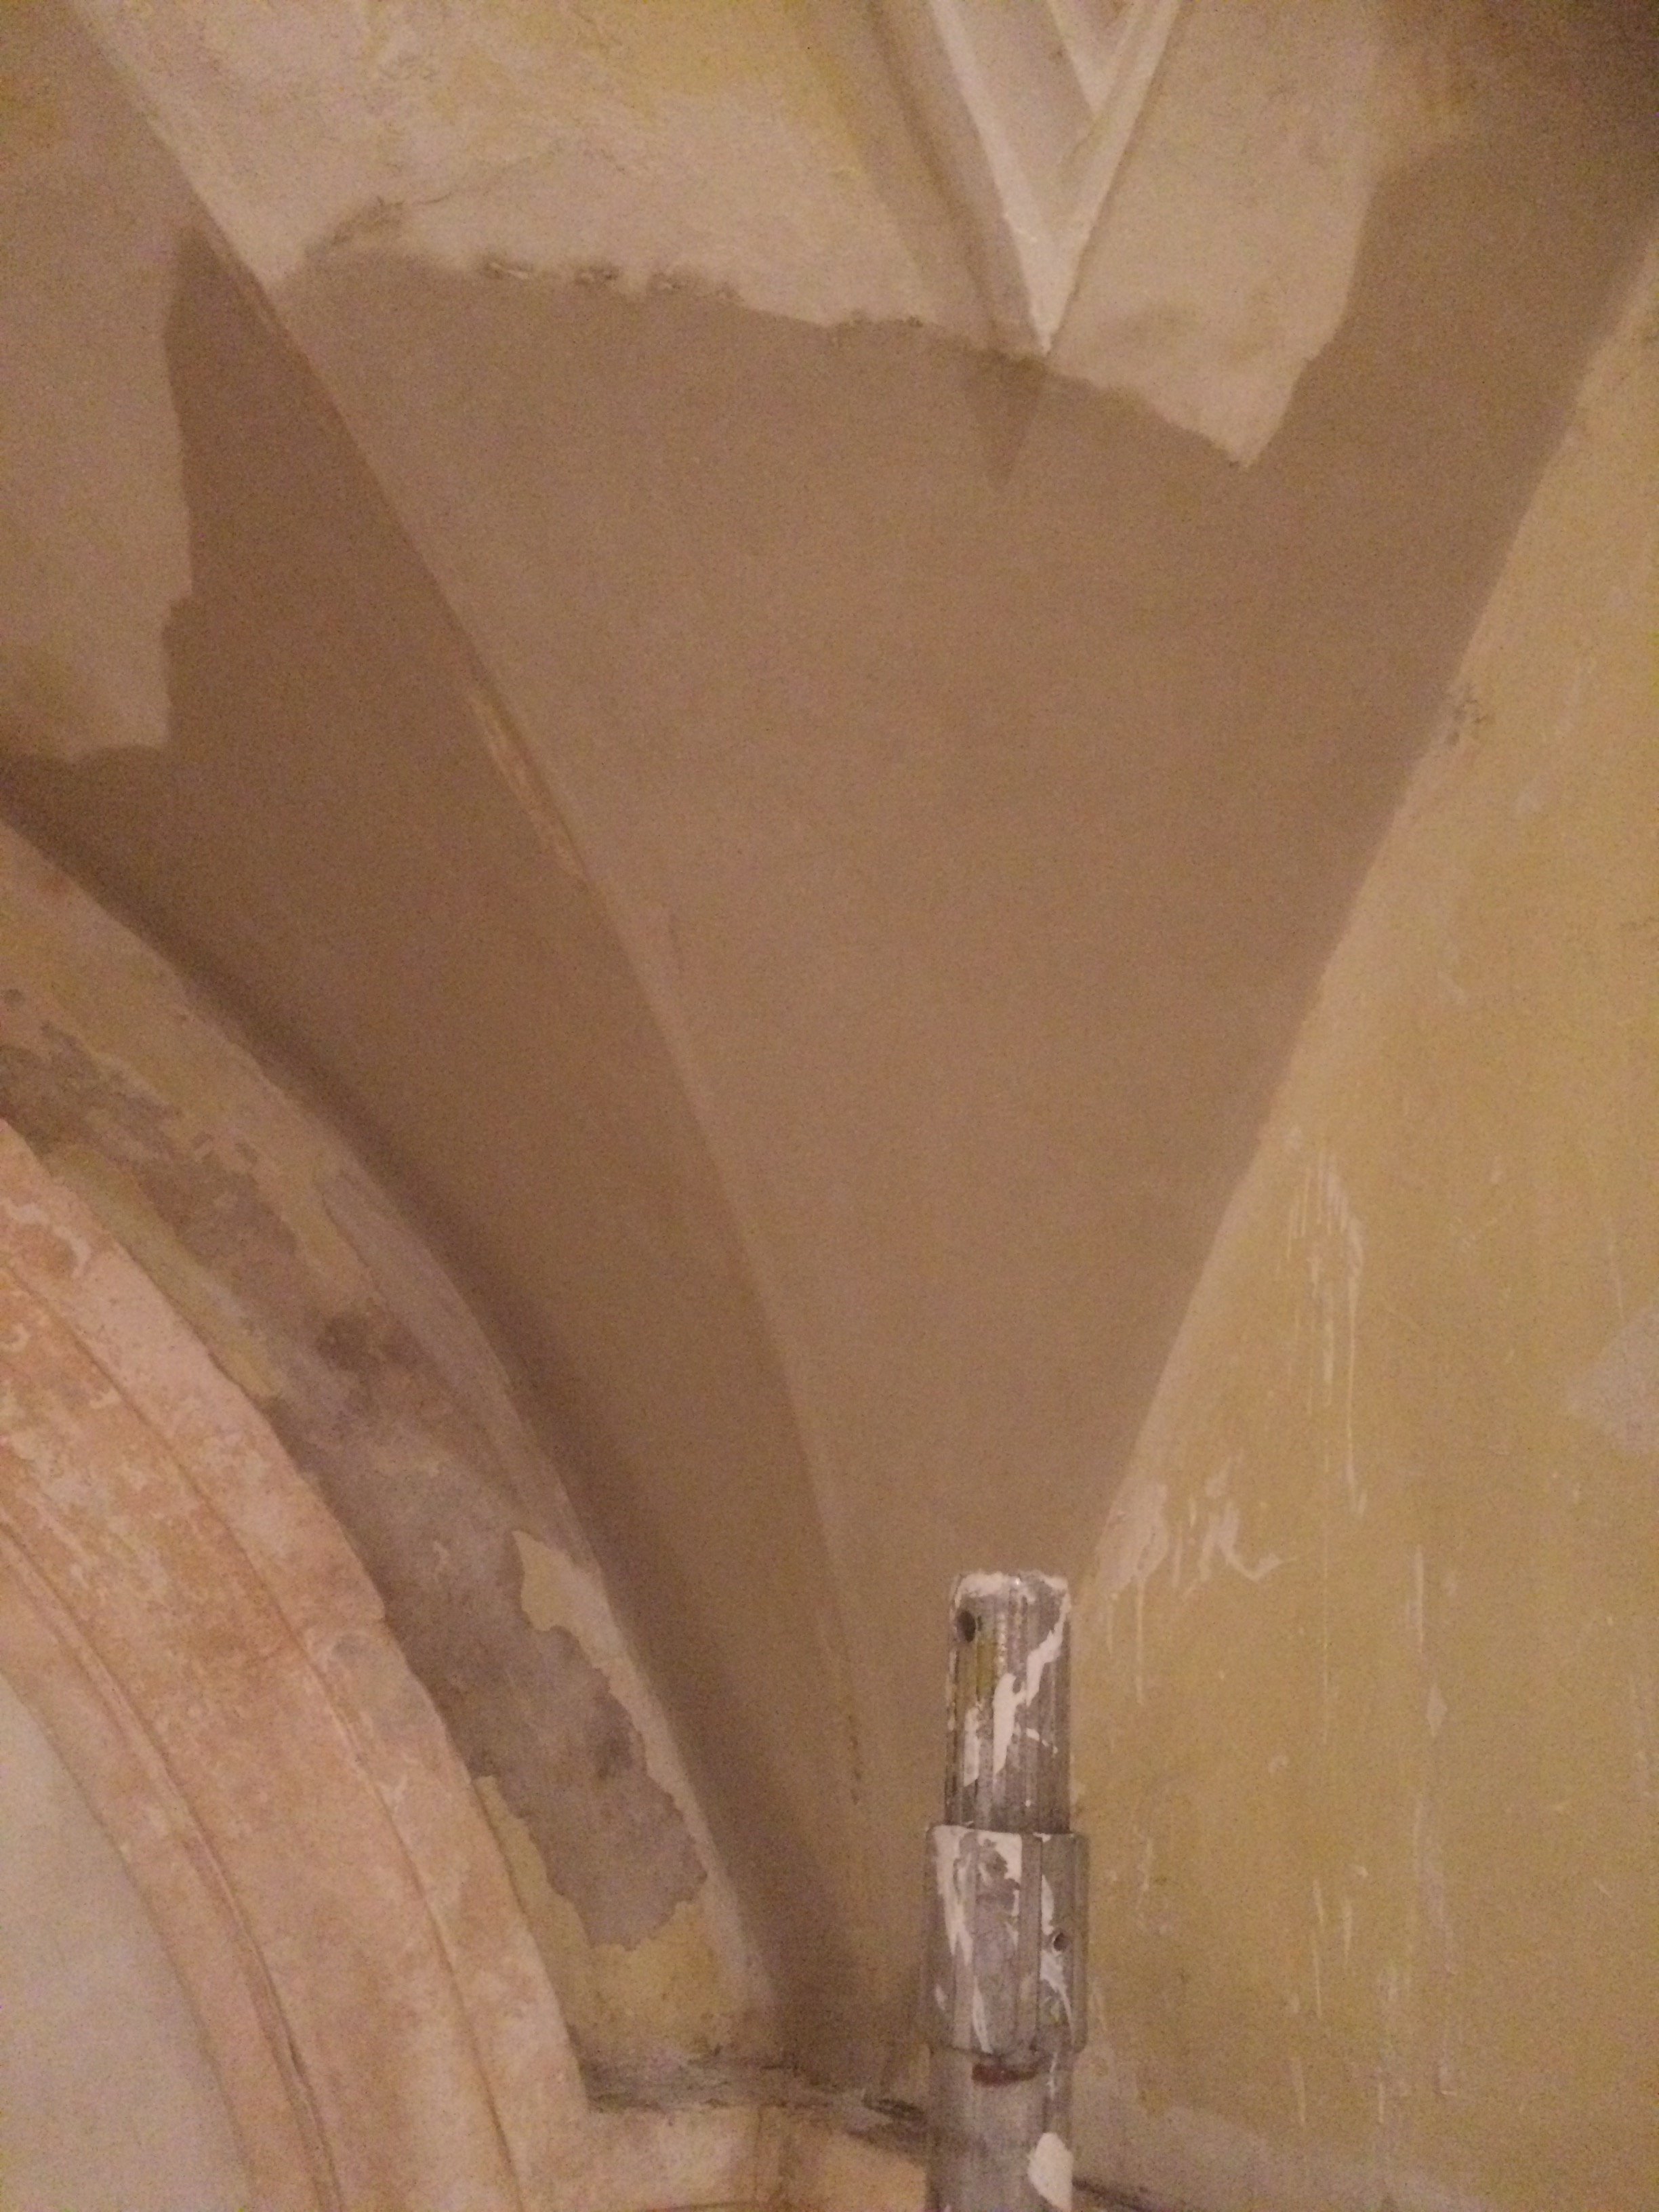 fibrous plasterers lets see your work today